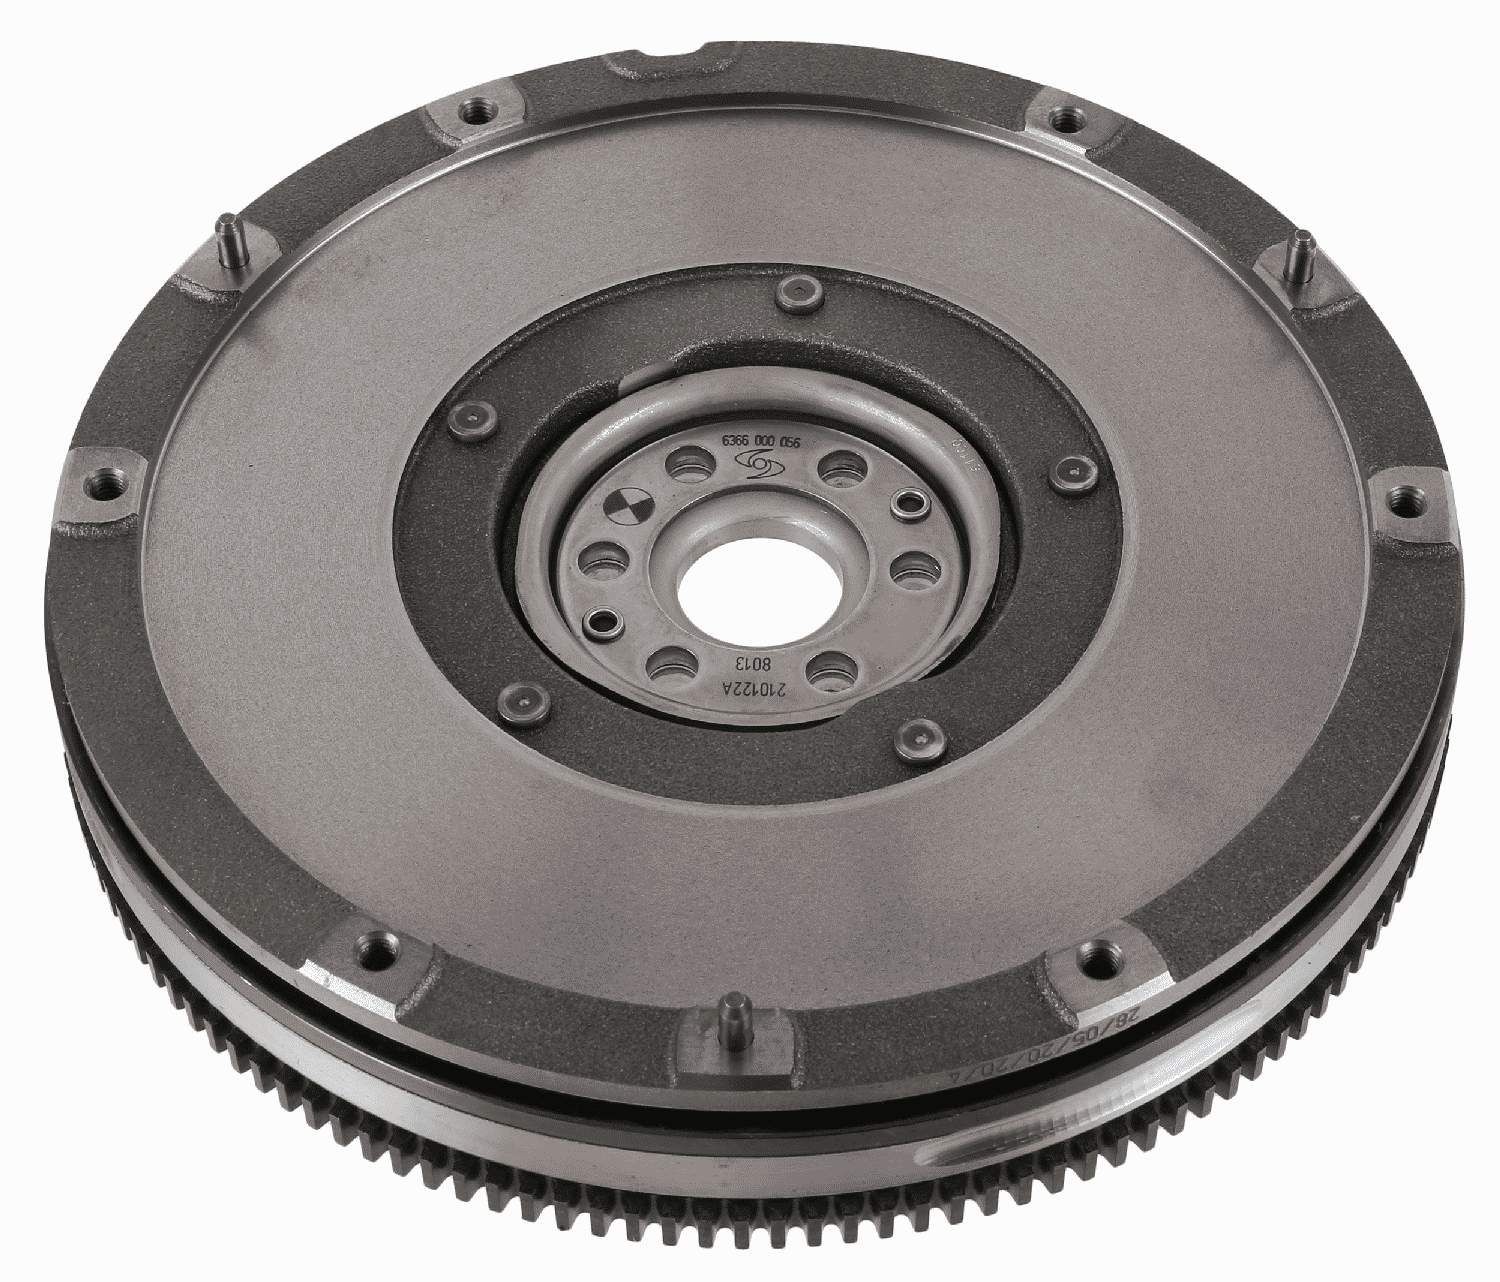 Dual mass flywheel 6366 000 056 Ford FOCUS 2013 – buy replacement parts